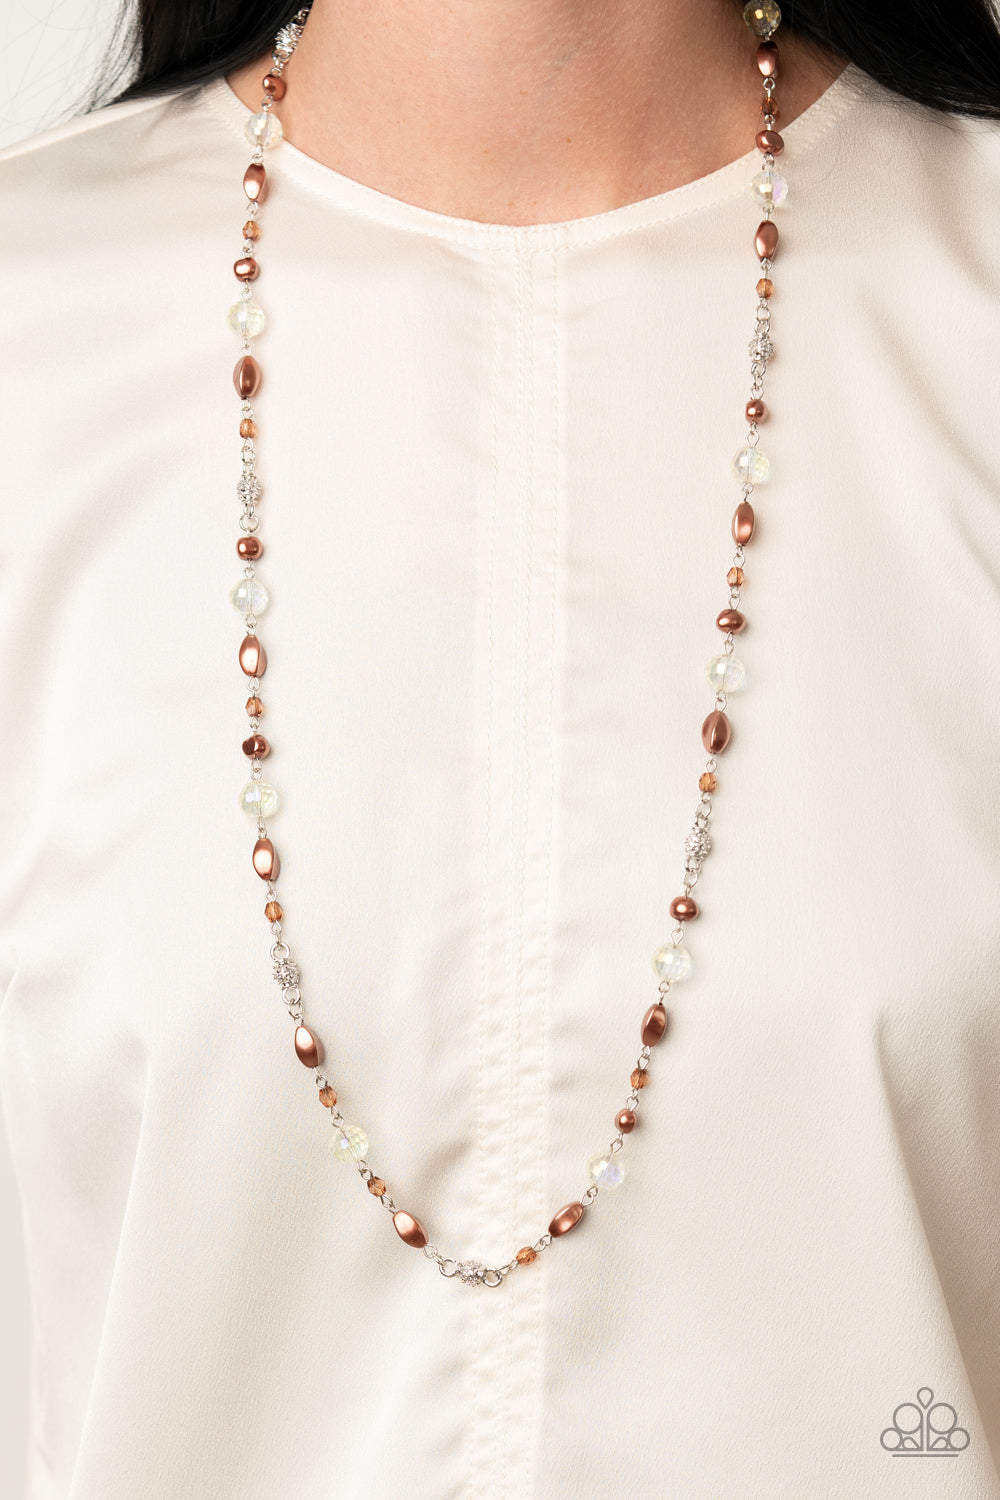 Twinkling Treasures - Brown Necklace - Paparazzi Accessories - Paparazzi Accessories 